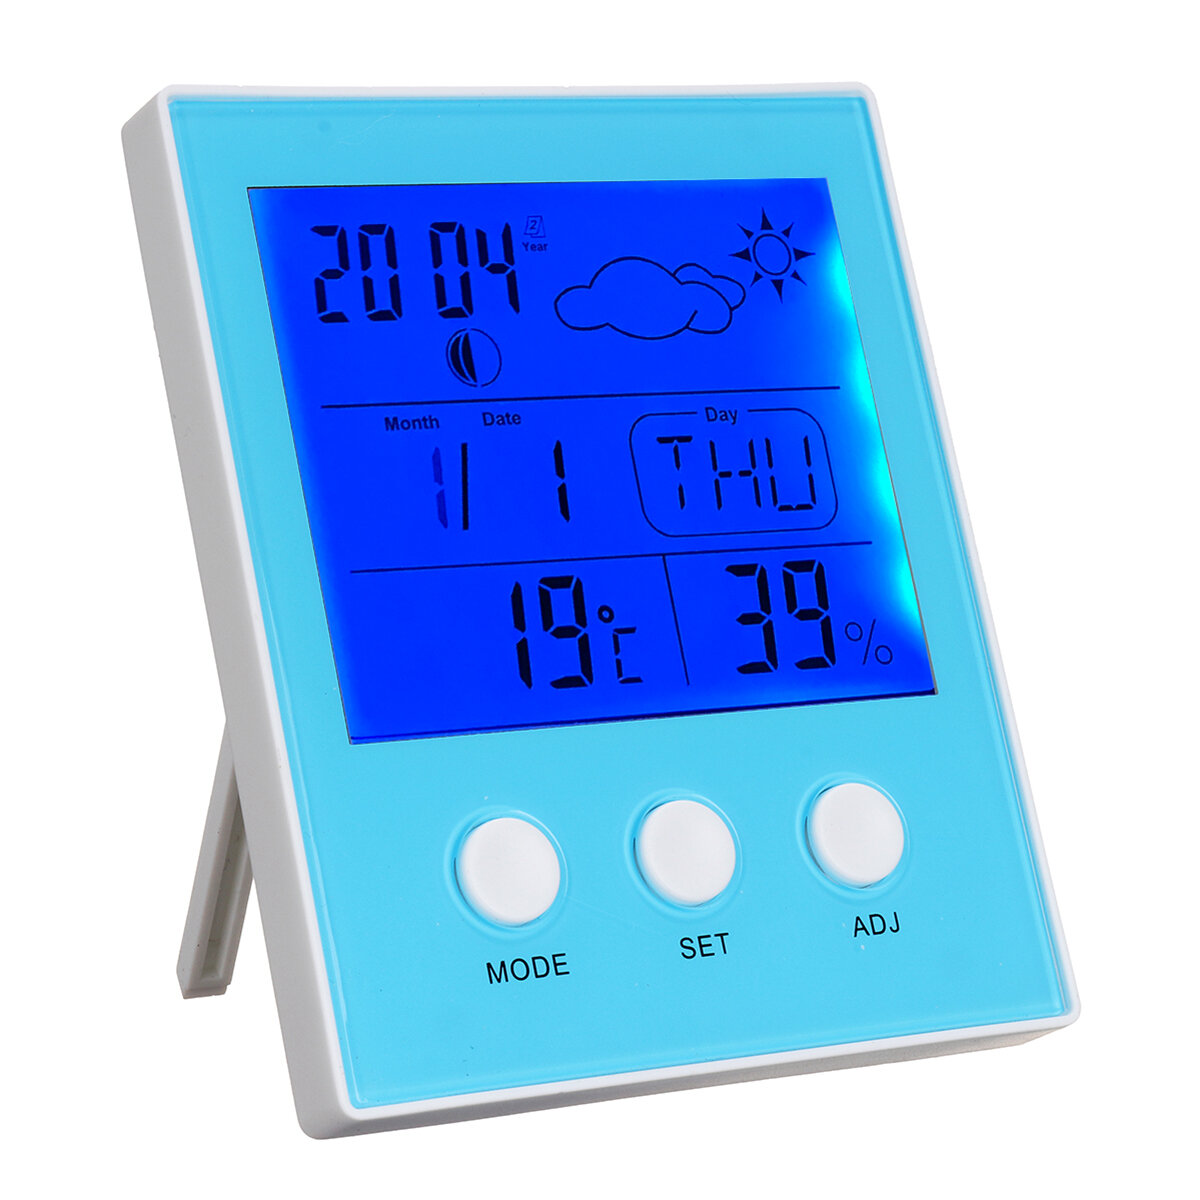 CH-904 Digital Thermometer Hygrometer Temperature Humidity Tester LED Backlight Time Date Calendar A